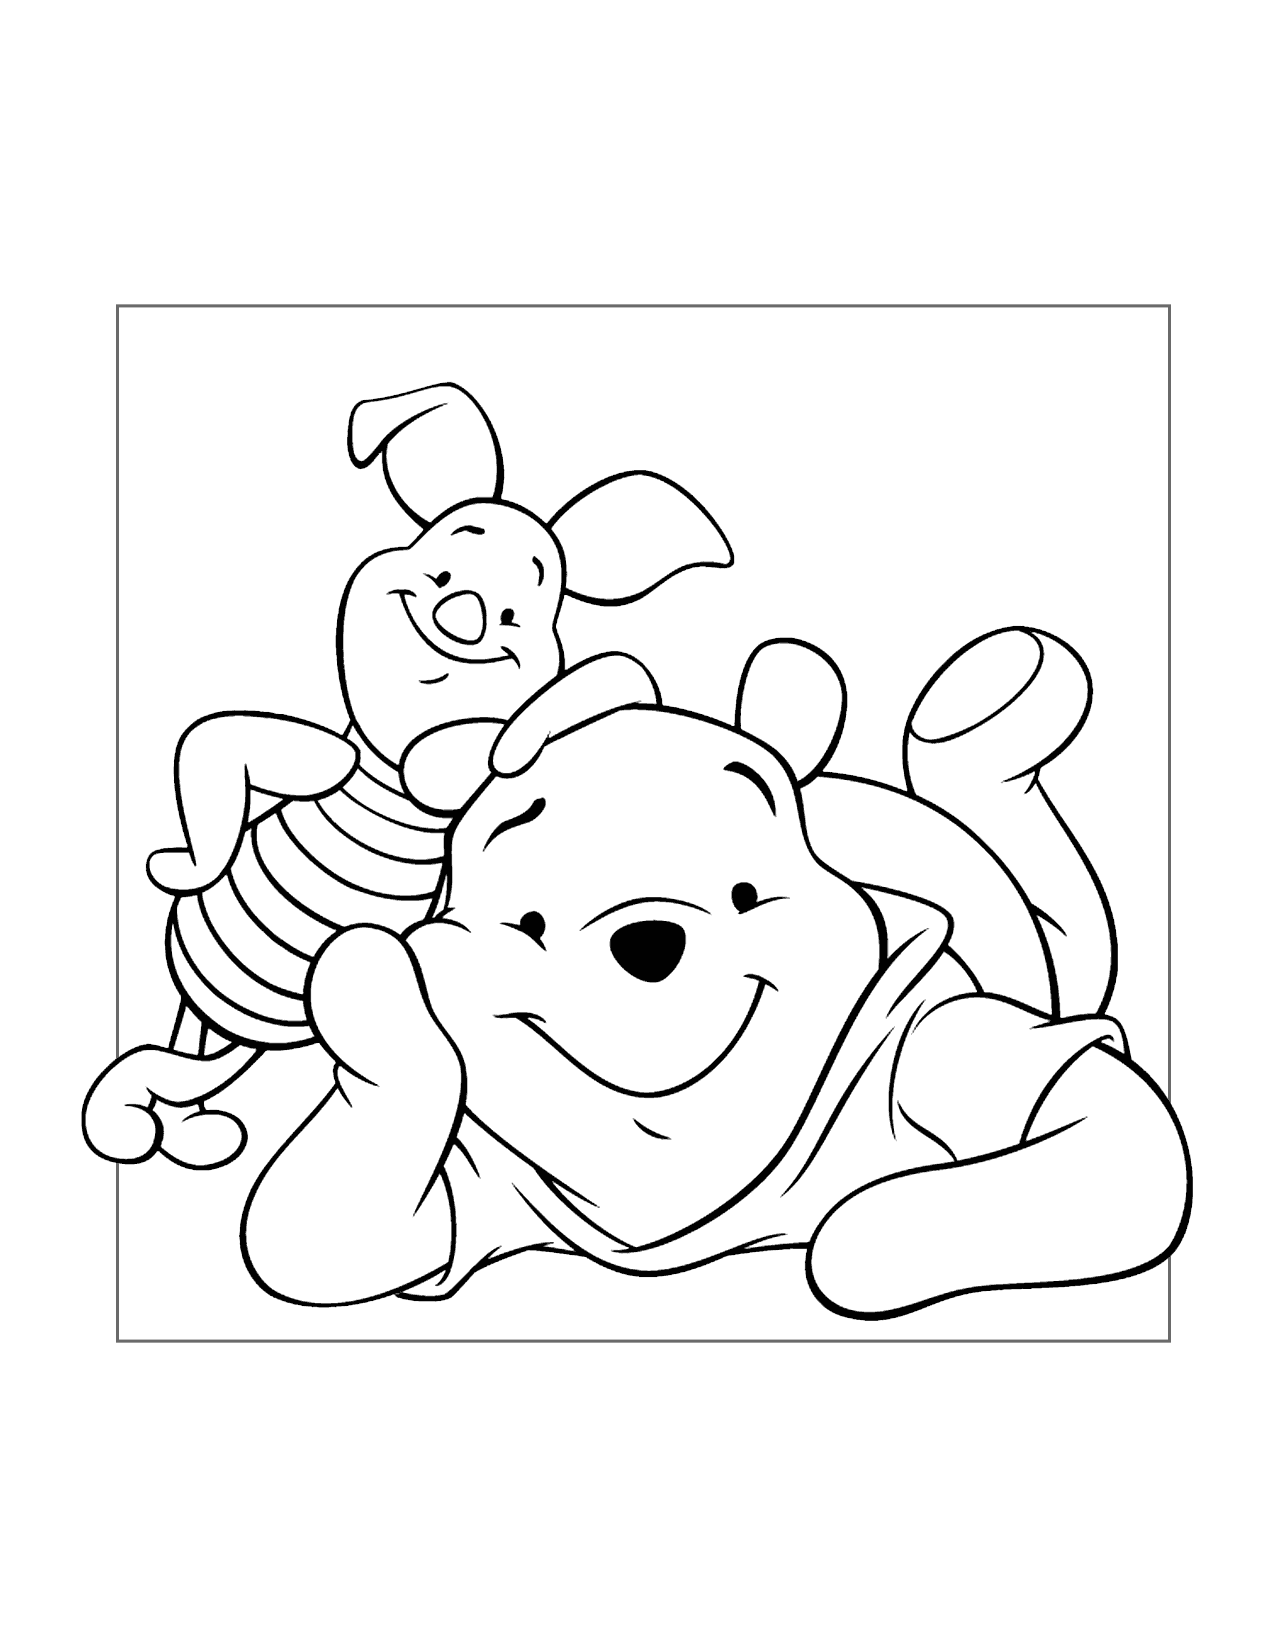 Piglet And Pooh Smiling Coloring Page